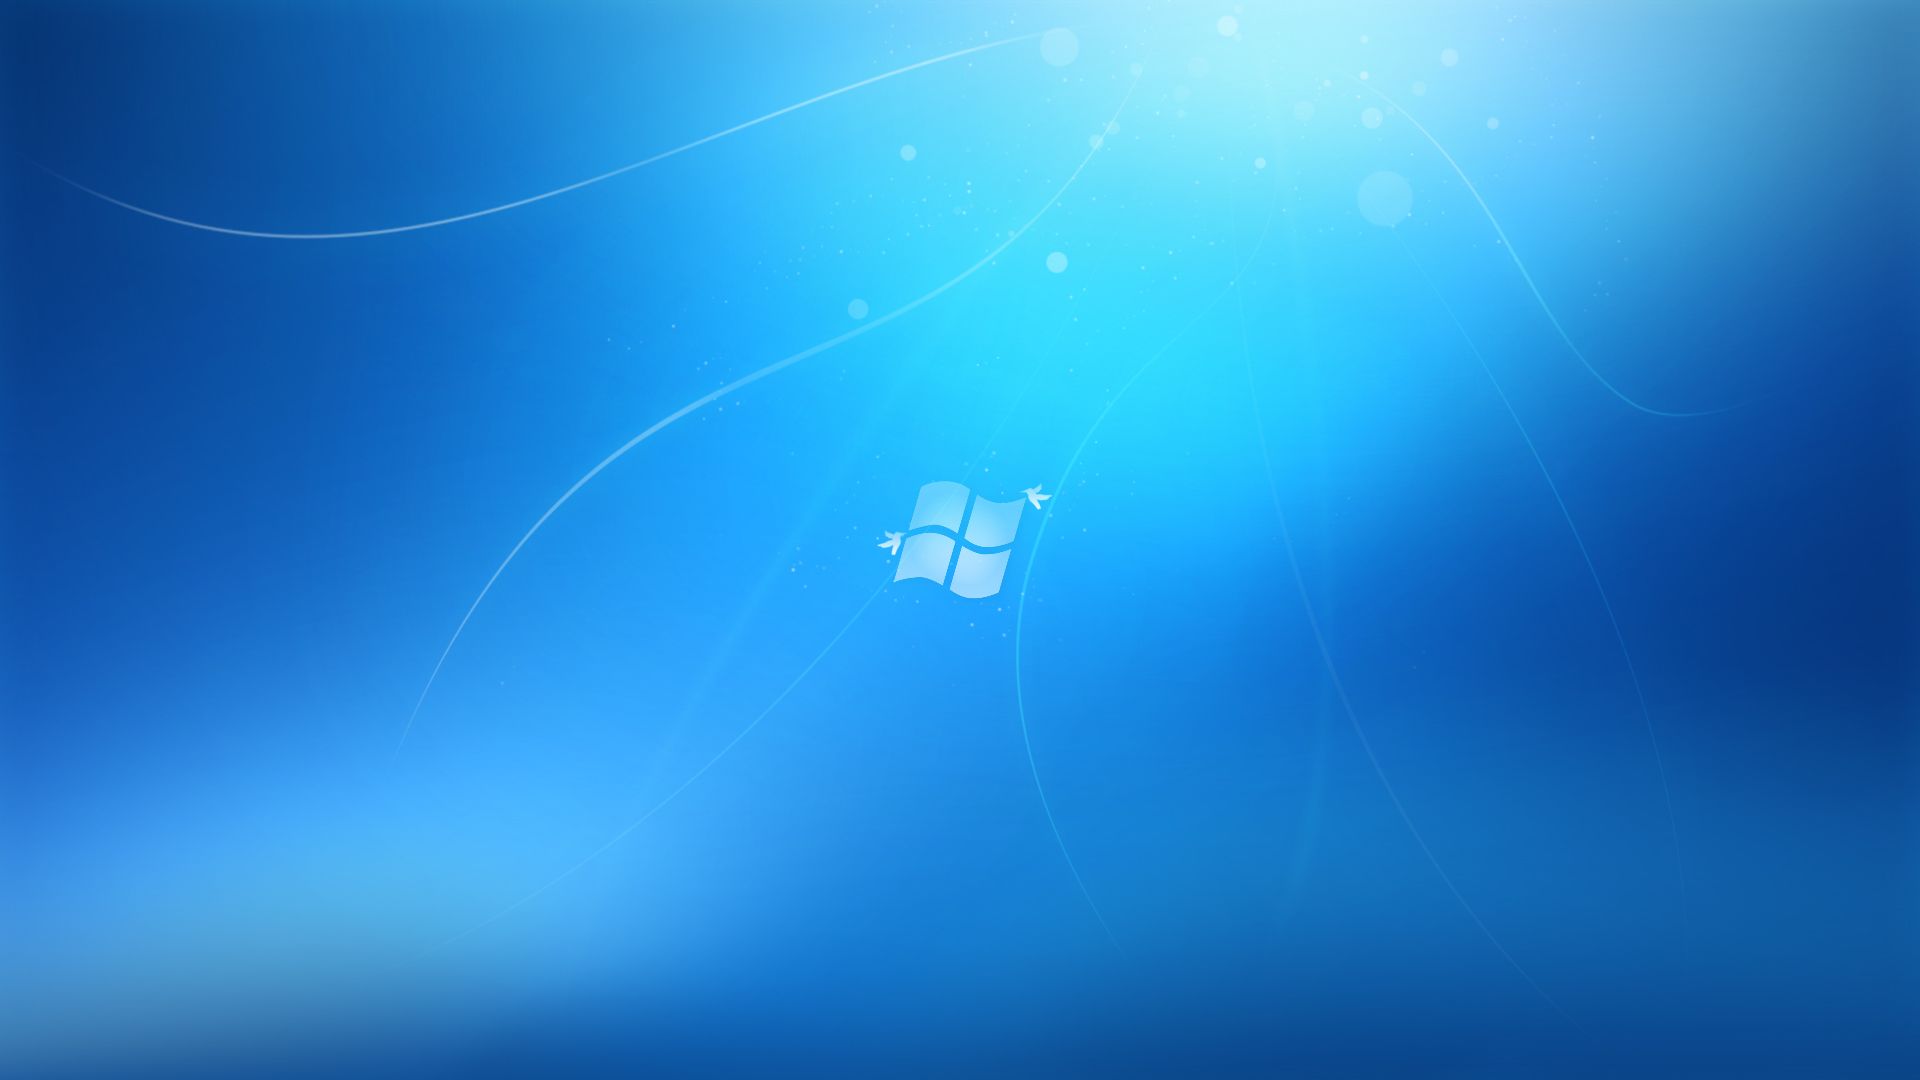 Windows 7 Blue 1080p HD Wallpapers HD Backgrounds